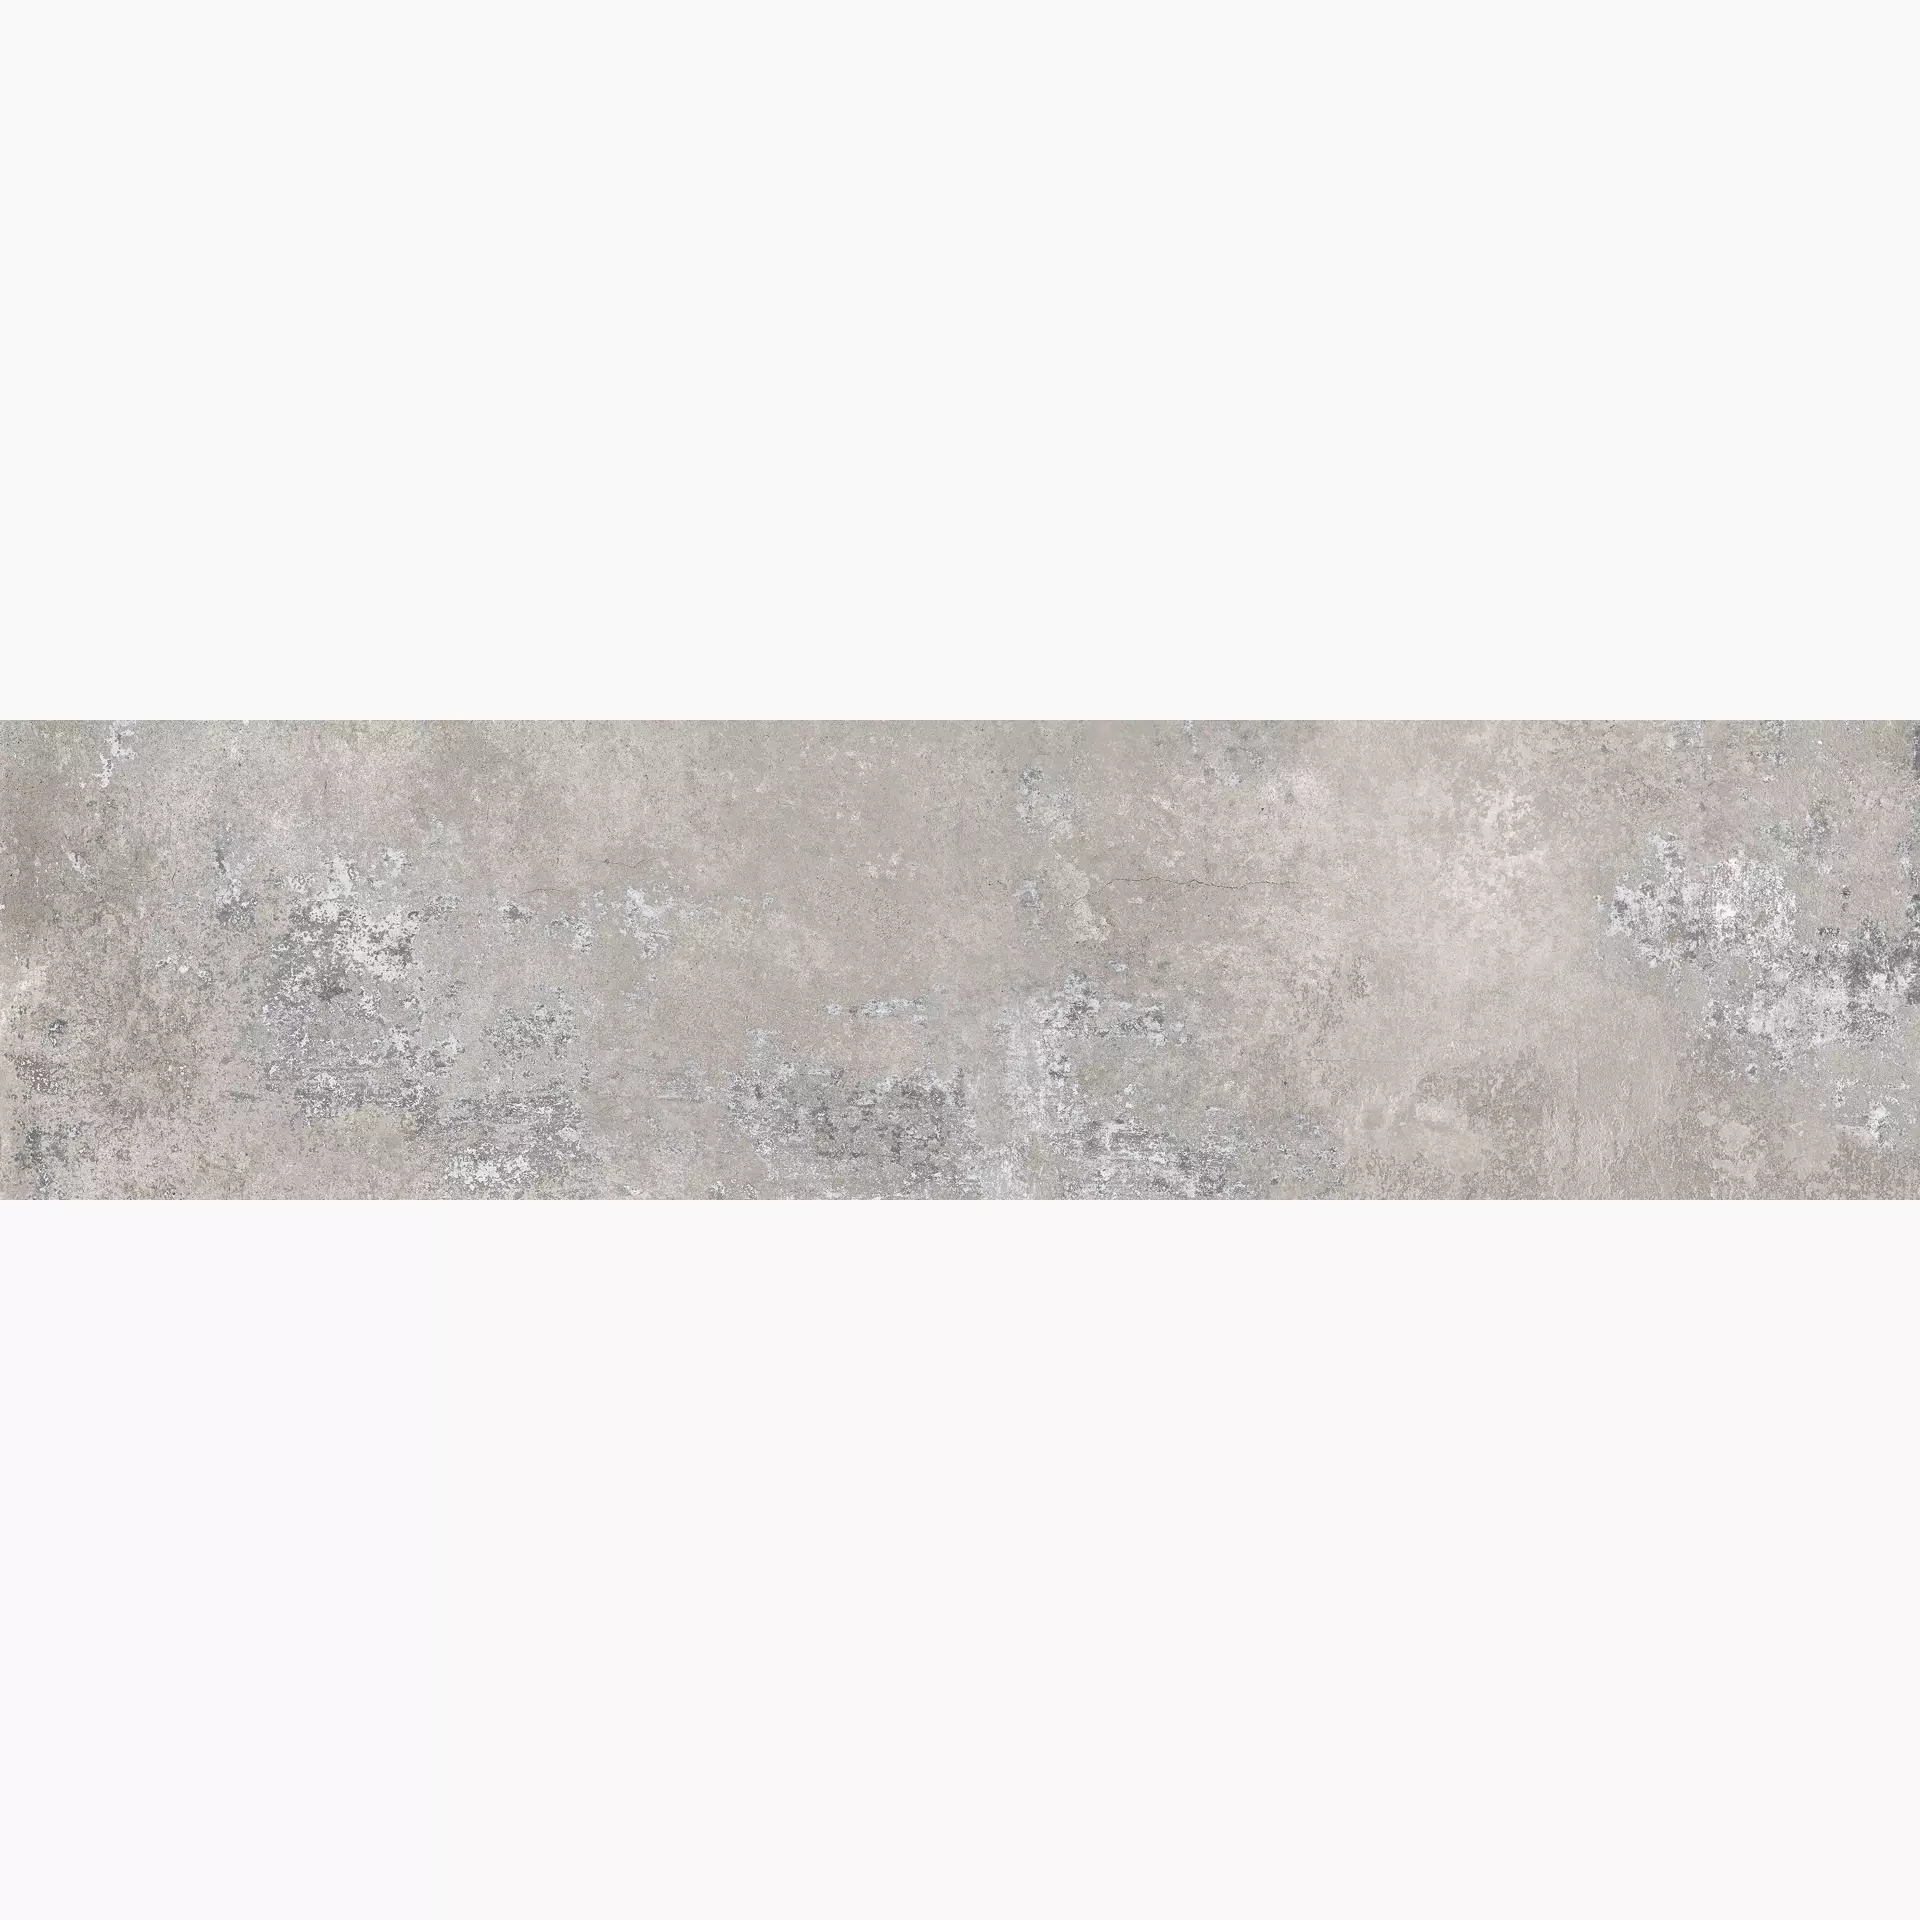 ABK Ghost Grey Naturale PF60004370 30x120cm rectified 8,5mm